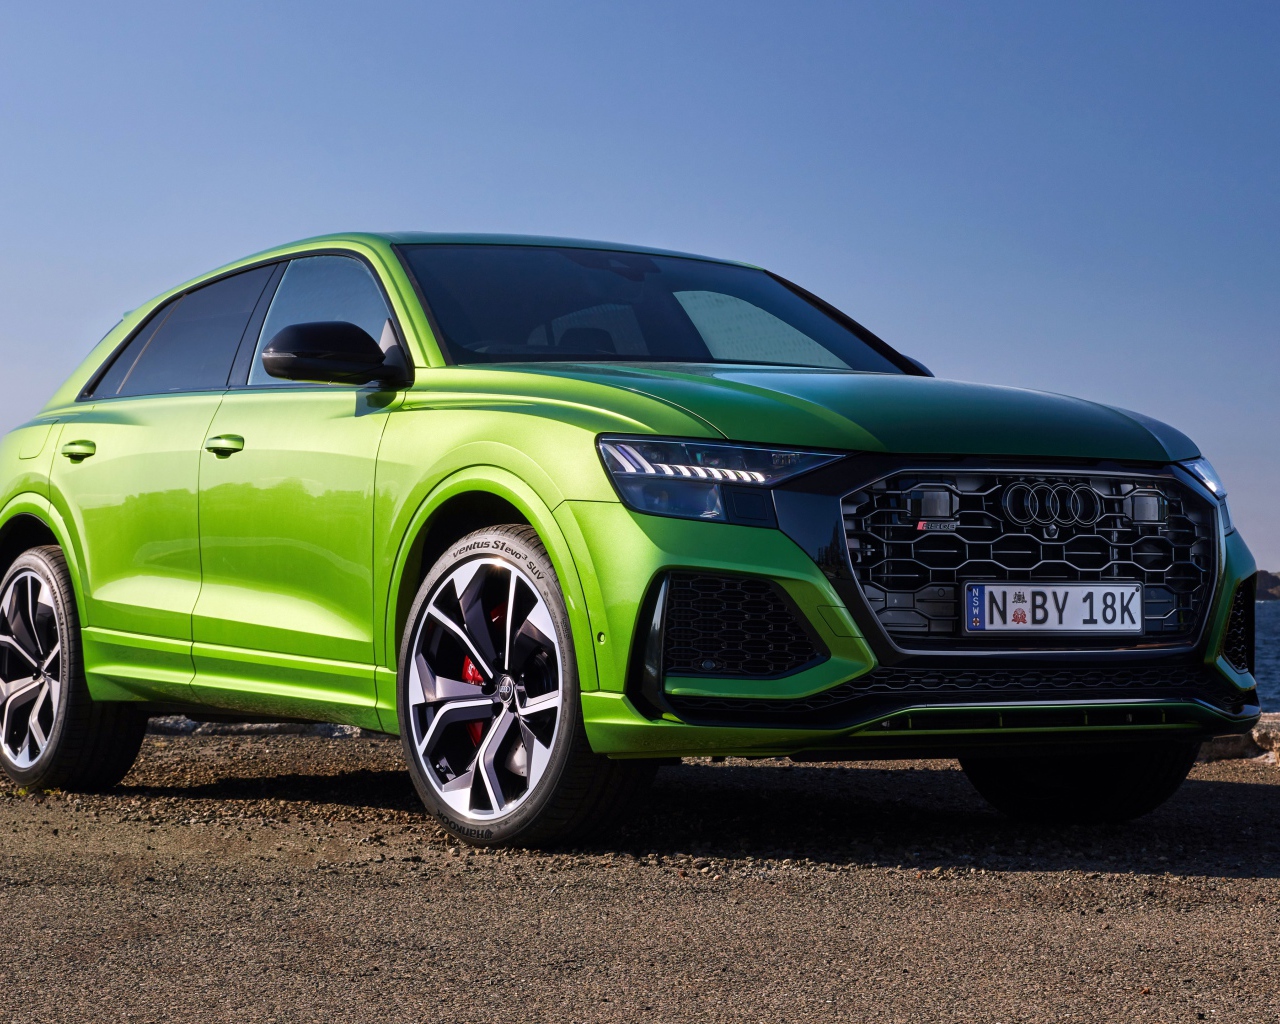 2020 Audi RS Q8 green car front view